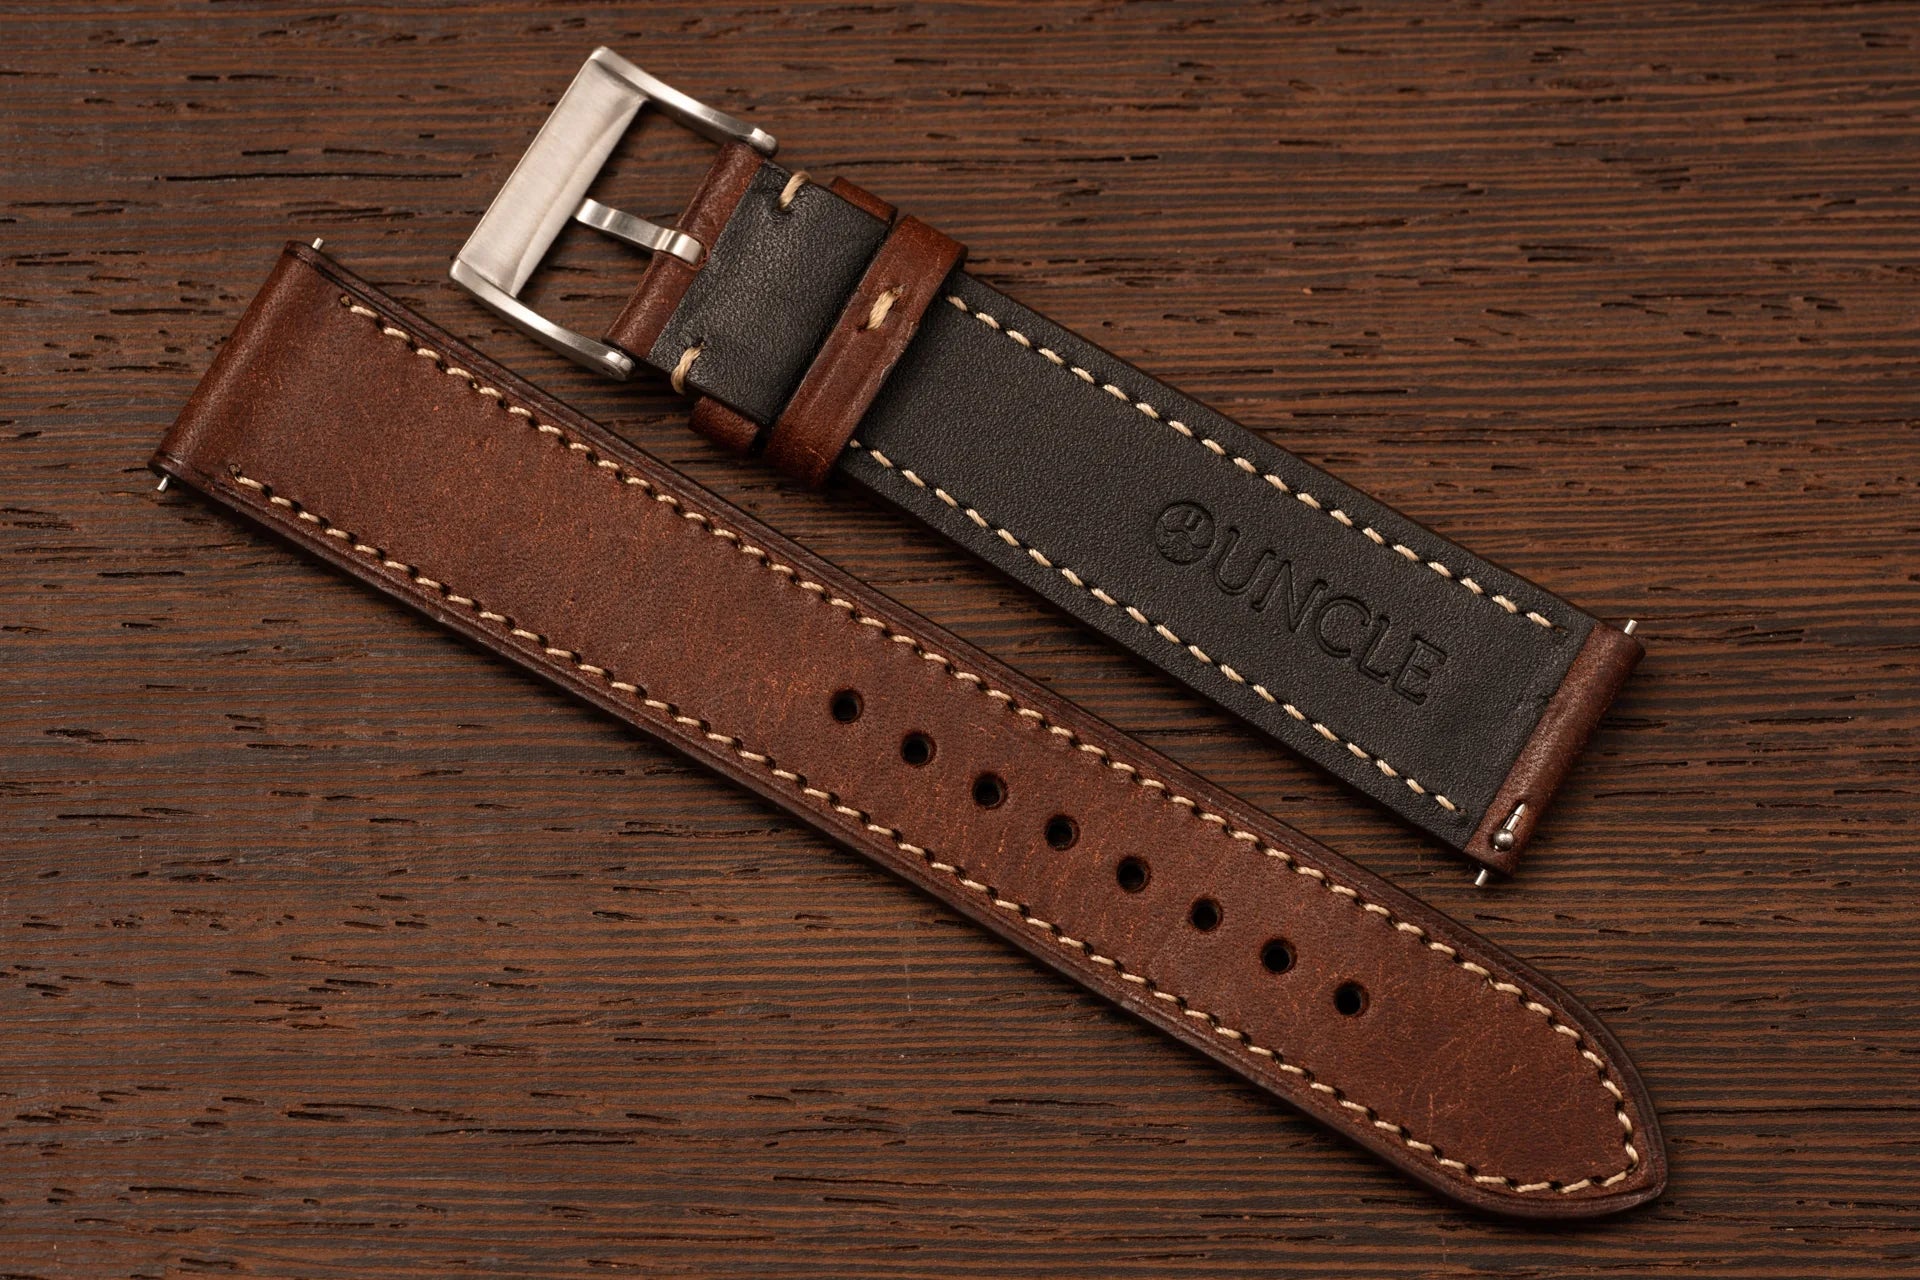 Classic Cowhide Leather Strap - Walnut